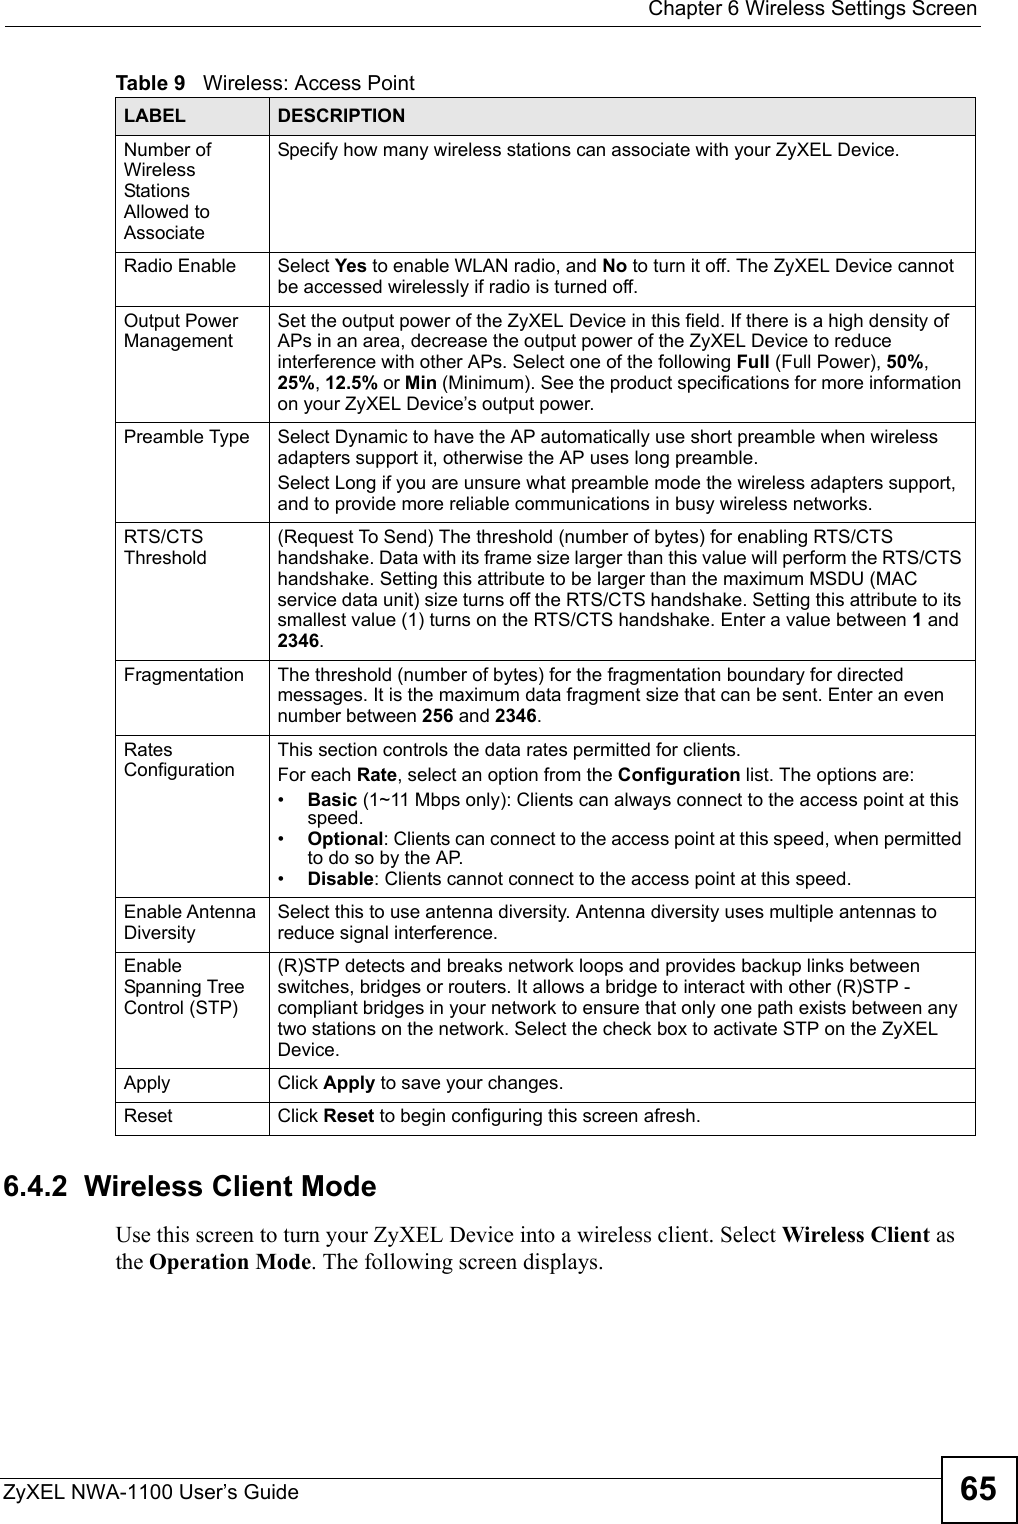  Chapter 6 Wireless Settings ScreenZyXEL NWA-1100 User’s Guide 656.4.2  Wireless Client ModeUse this screen to turn your ZyXEL Device into a wireless client. Select Wireless Client as the Operation Mode. The following screen displays.Number of Wireless Stations Allowed to AssociateSpecify how many wireless stations can associate with your ZyXEL Device.Radio Enable Select Yes to enable WLAN radio, and No to turn it off. The ZyXEL Device cannot be accessed wirelessly if radio is turned off.Output Power ManagementSet the output power of the ZyXEL Device in this field. If there is a high density of APs in an area, decrease the output power of the ZyXEL Device to reduce interference with other APs. Select one of the following Full (Full Power), 50%, 25%, 12.5% or Min (Minimum). See the product specifications for more information on your ZyXEL Device’s output power.Preamble Type Select Dynamic to have the AP automatically use short preamble when wireless adapters support it, otherwise the AP uses long preamble.Select Long if you are unsure what preamble mode the wireless adapters support, and to provide more reliable communications in busy wireless networks. RTS/CTS Threshold(Request To Send) The threshold (number of bytes) for enabling RTS/CTS handshake. Data with its frame size larger than this value will perform the RTS/CTS handshake. Setting this attribute to be larger than the maximum MSDU (MAC service data unit) size turns off the RTS/CTS handshake. Setting this attribute to its smallest value (1) turns on the RTS/CTS handshake. Enter a value between 1 and 2346.Fragmentation The threshold (number of bytes) for the fragmentation boundary for directed messages. It is the maximum data fragment size that can be sent. Enter an even number between 256 and 2346.Rates ConfigurationThis section controls the data rates permitted for clients. For each Rate, select an option from the Configuration list. The options are:•Basic (1~11 Mbps only): Clients can always connect to the access point at this speed.•Optional: Clients can connect to the access point at this speed, when permitted to do so by the AP.•Disable: Clients cannot connect to the access point at this speed.Enable Antenna DiversitySelect this to use antenna diversity. Antenna diversity uses multiple antennas to reduce signal interference.Enable Spanning Tree Control (STP)(R)STP detects and breaks network loops and provides backup links between switches, bridges or routers. It allows a bridge to interact with other (R)STP -compliant bridges in your network to ensure that only one path exists between any two stations on the network. Select the check box to activate STP on the ZyXEL Device.Apply Click Apply to save your changes.Reset Click Reset to begin configuring this screen afresh.Table 9   Wireless: Access PointLABEL DESCRIPTION